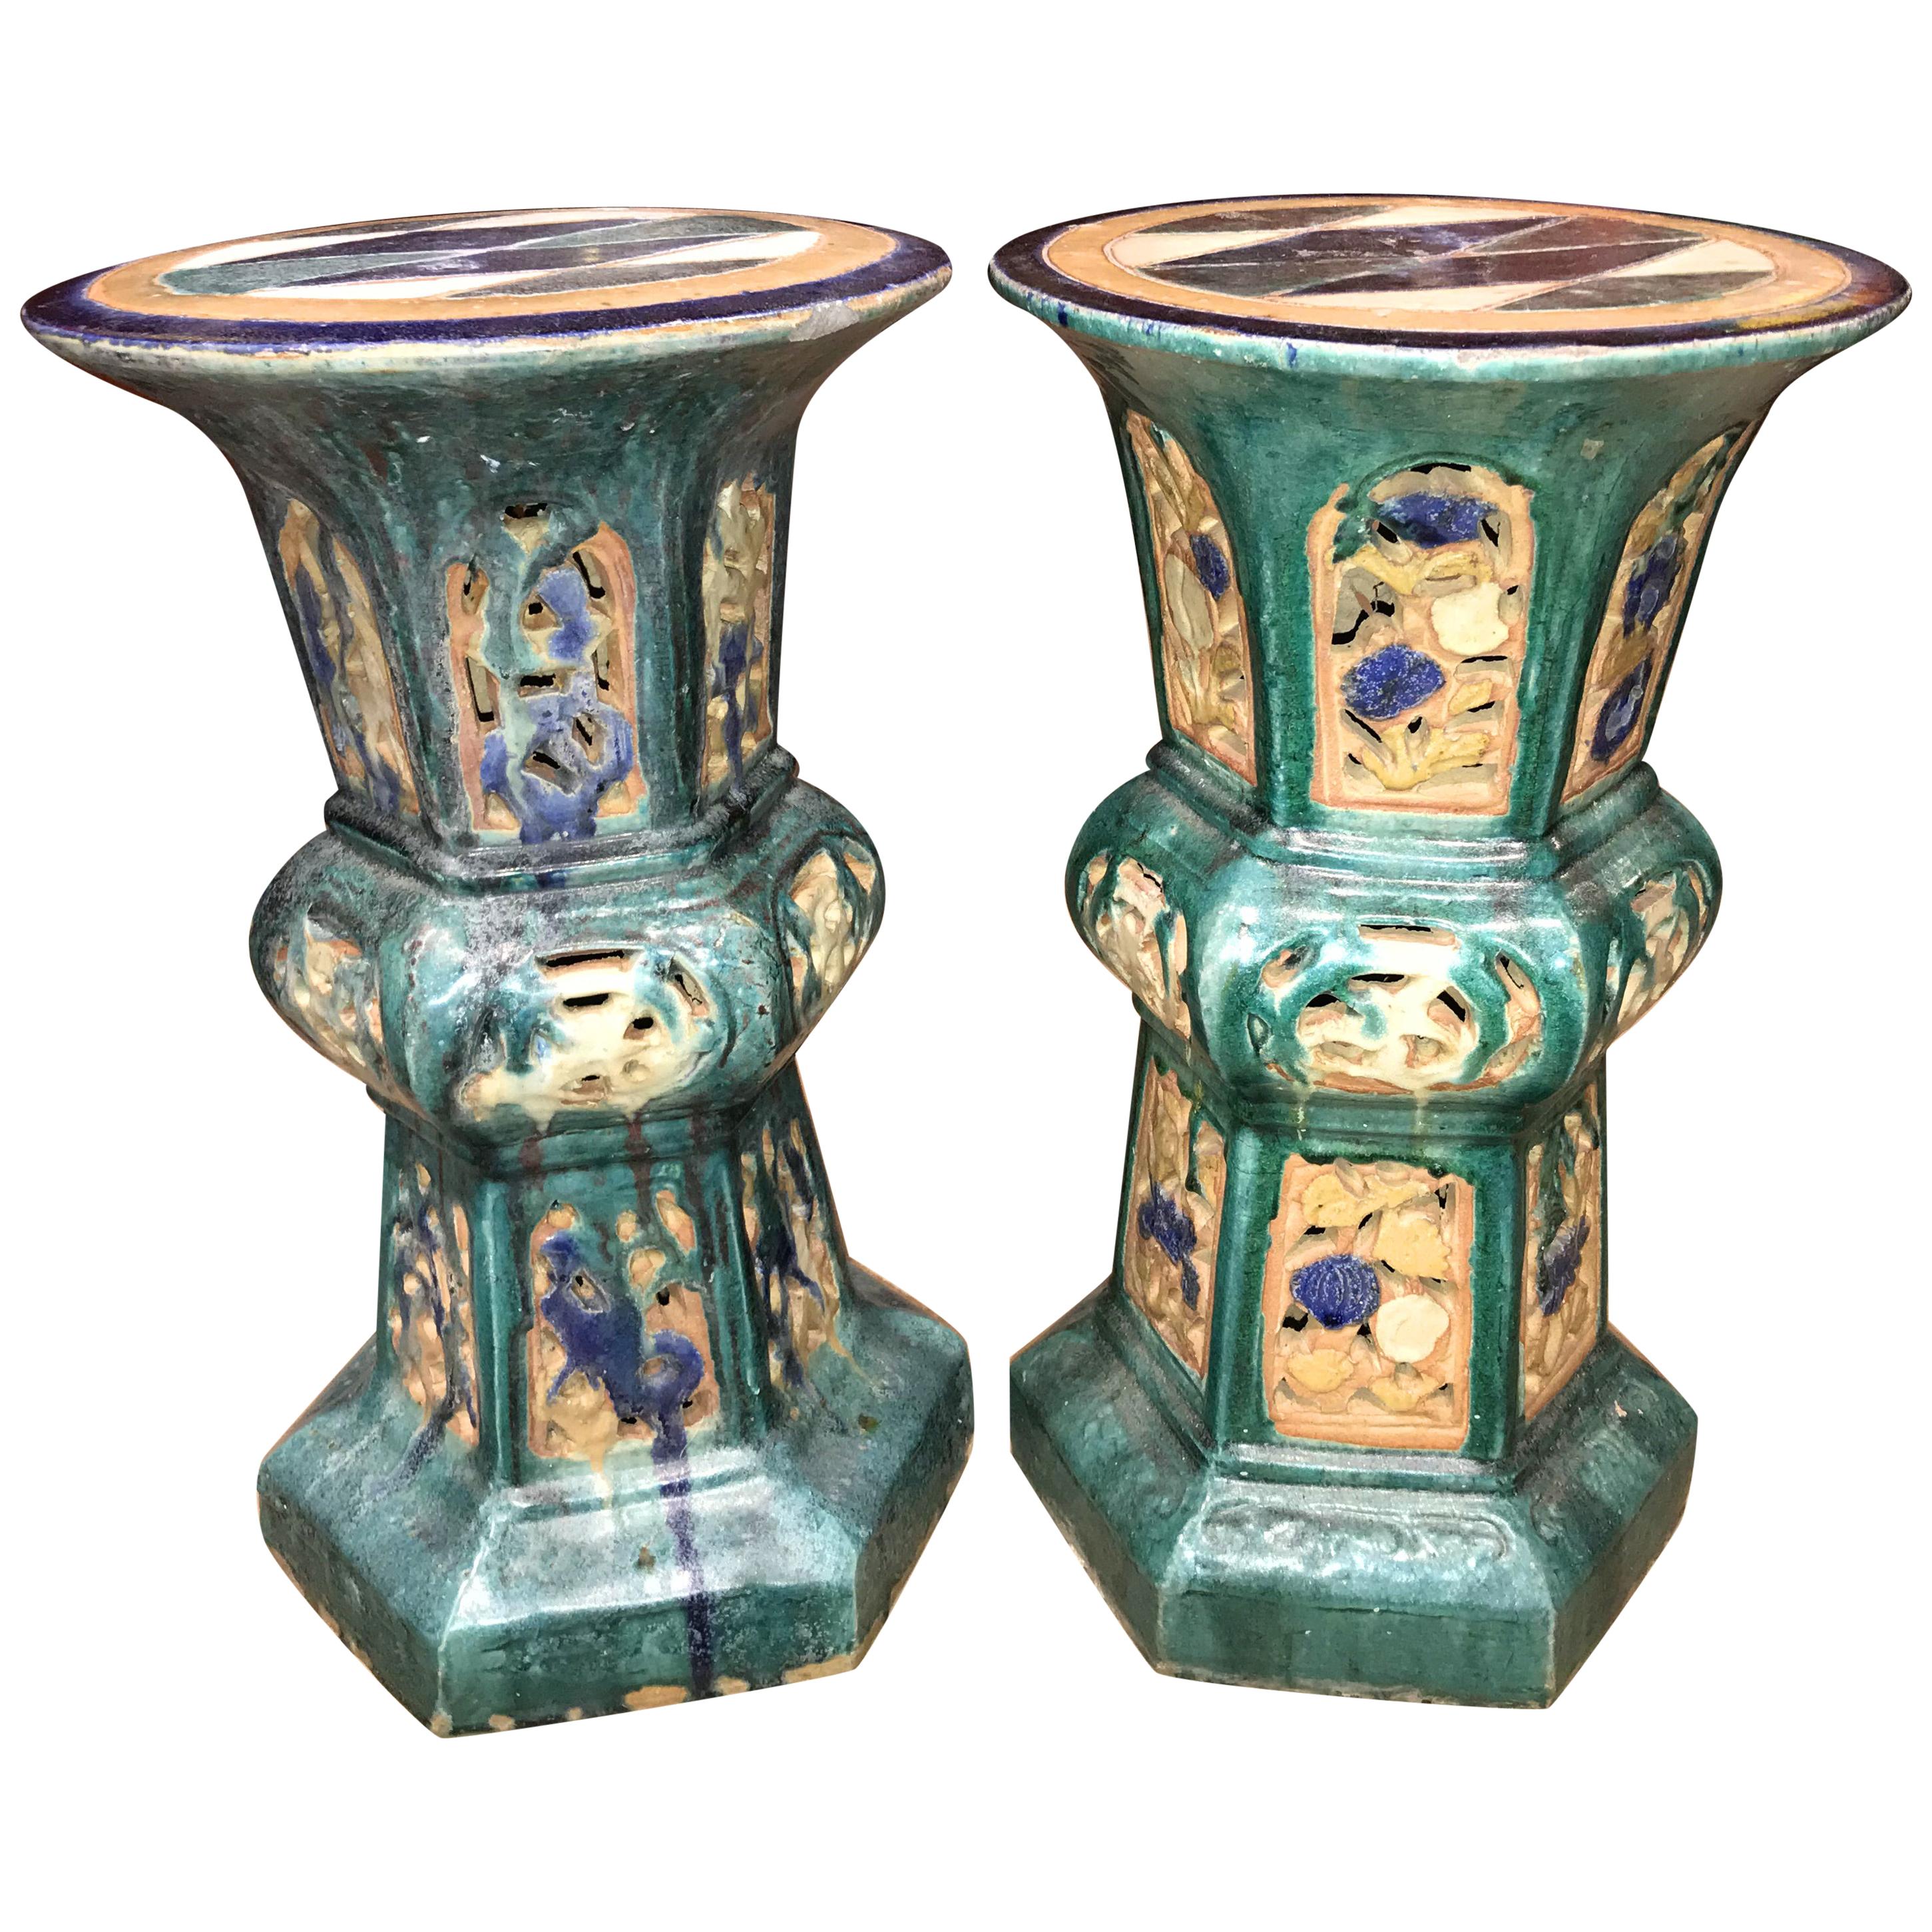 Pair of 19th Century Chinese Ceramic Reticulated Garden Pedestals or Stands